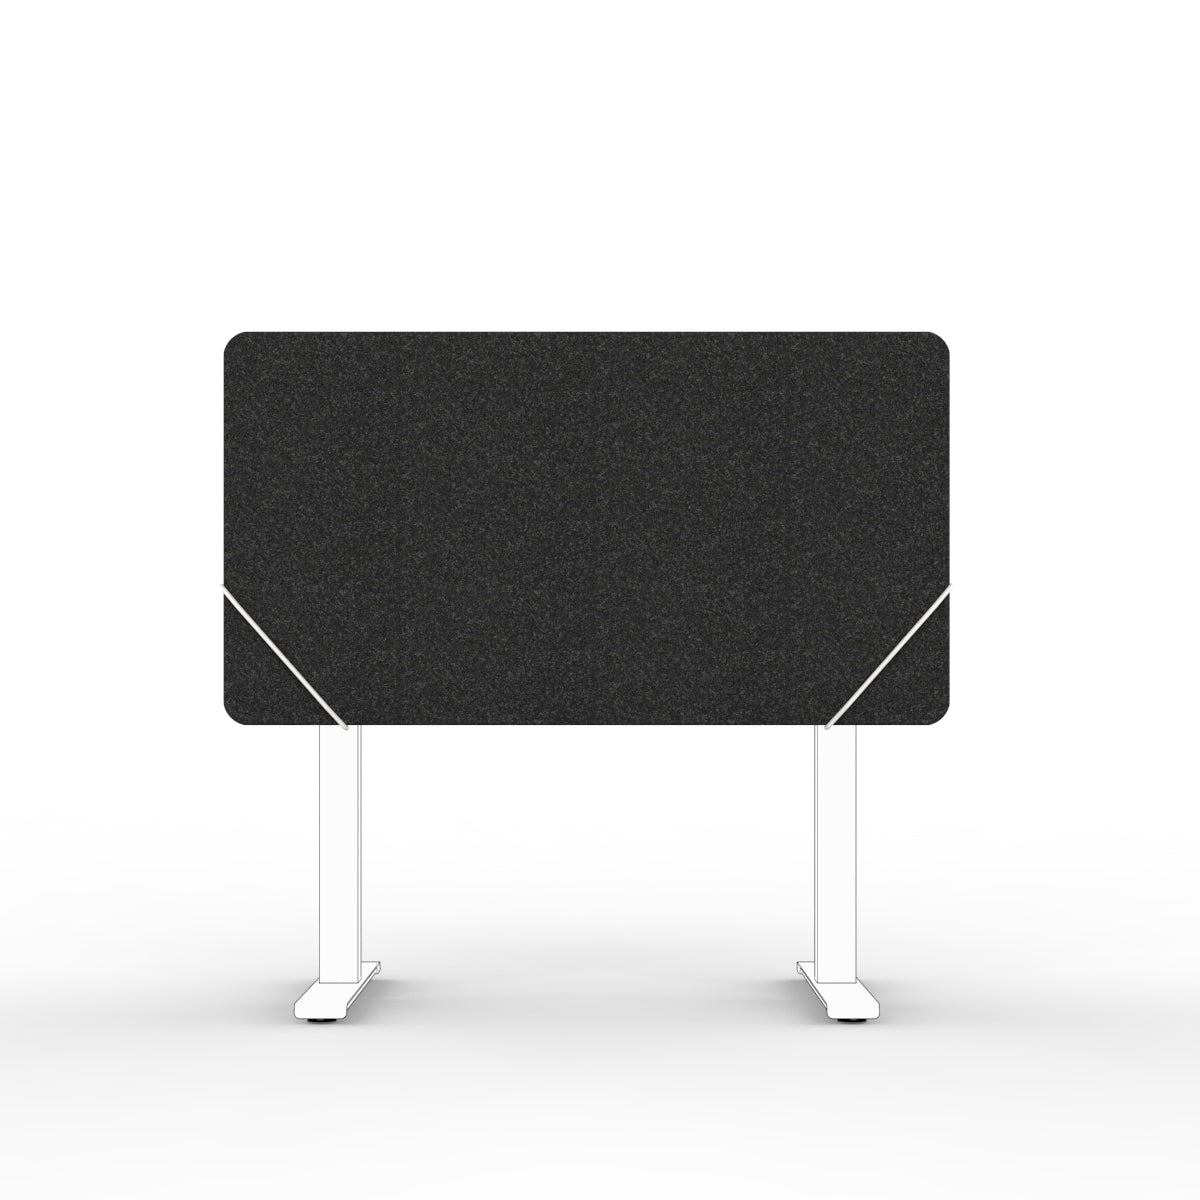 Table screen sound absorber in black melange with white slide on table mounts.  